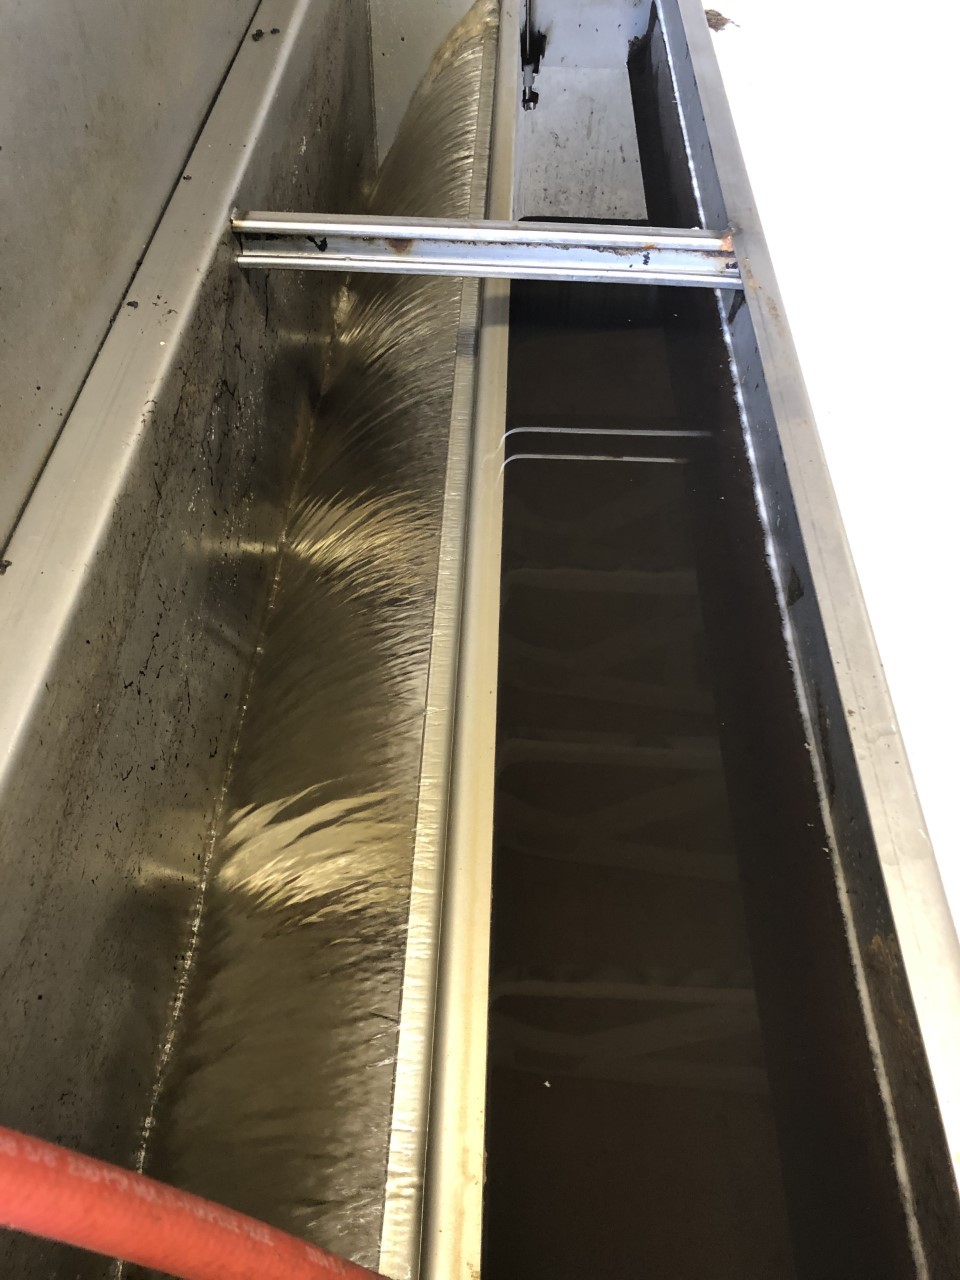 Installation of an advanced oxidation process to remove color and solids from wastewater and the clear effluent discharge